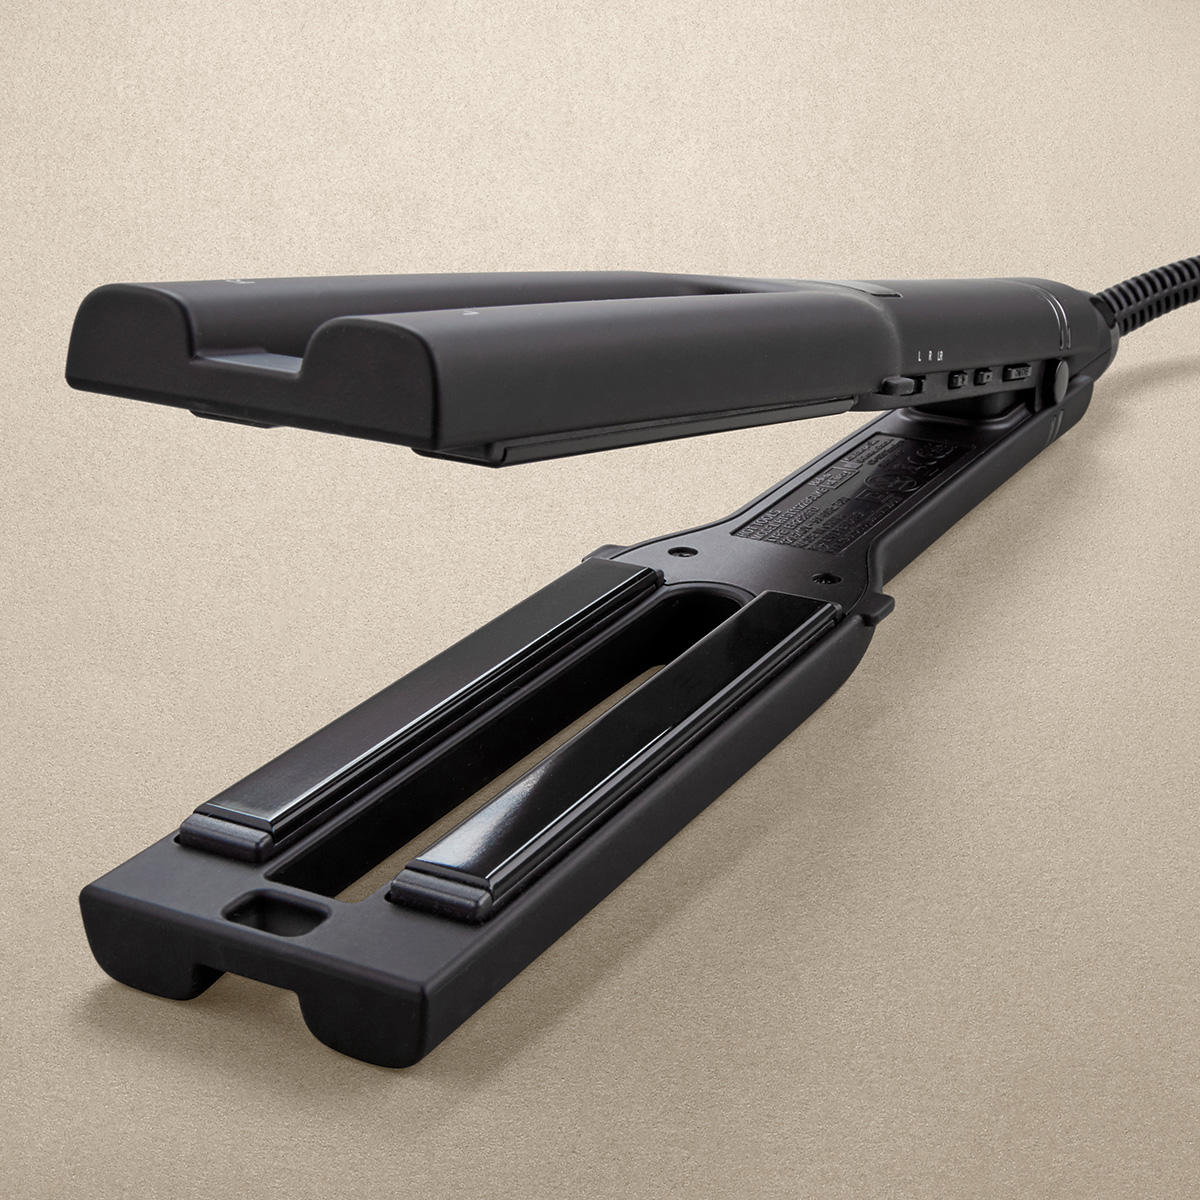 Hot Tools Black Gold Collection Dual Plate Straightener  - 6